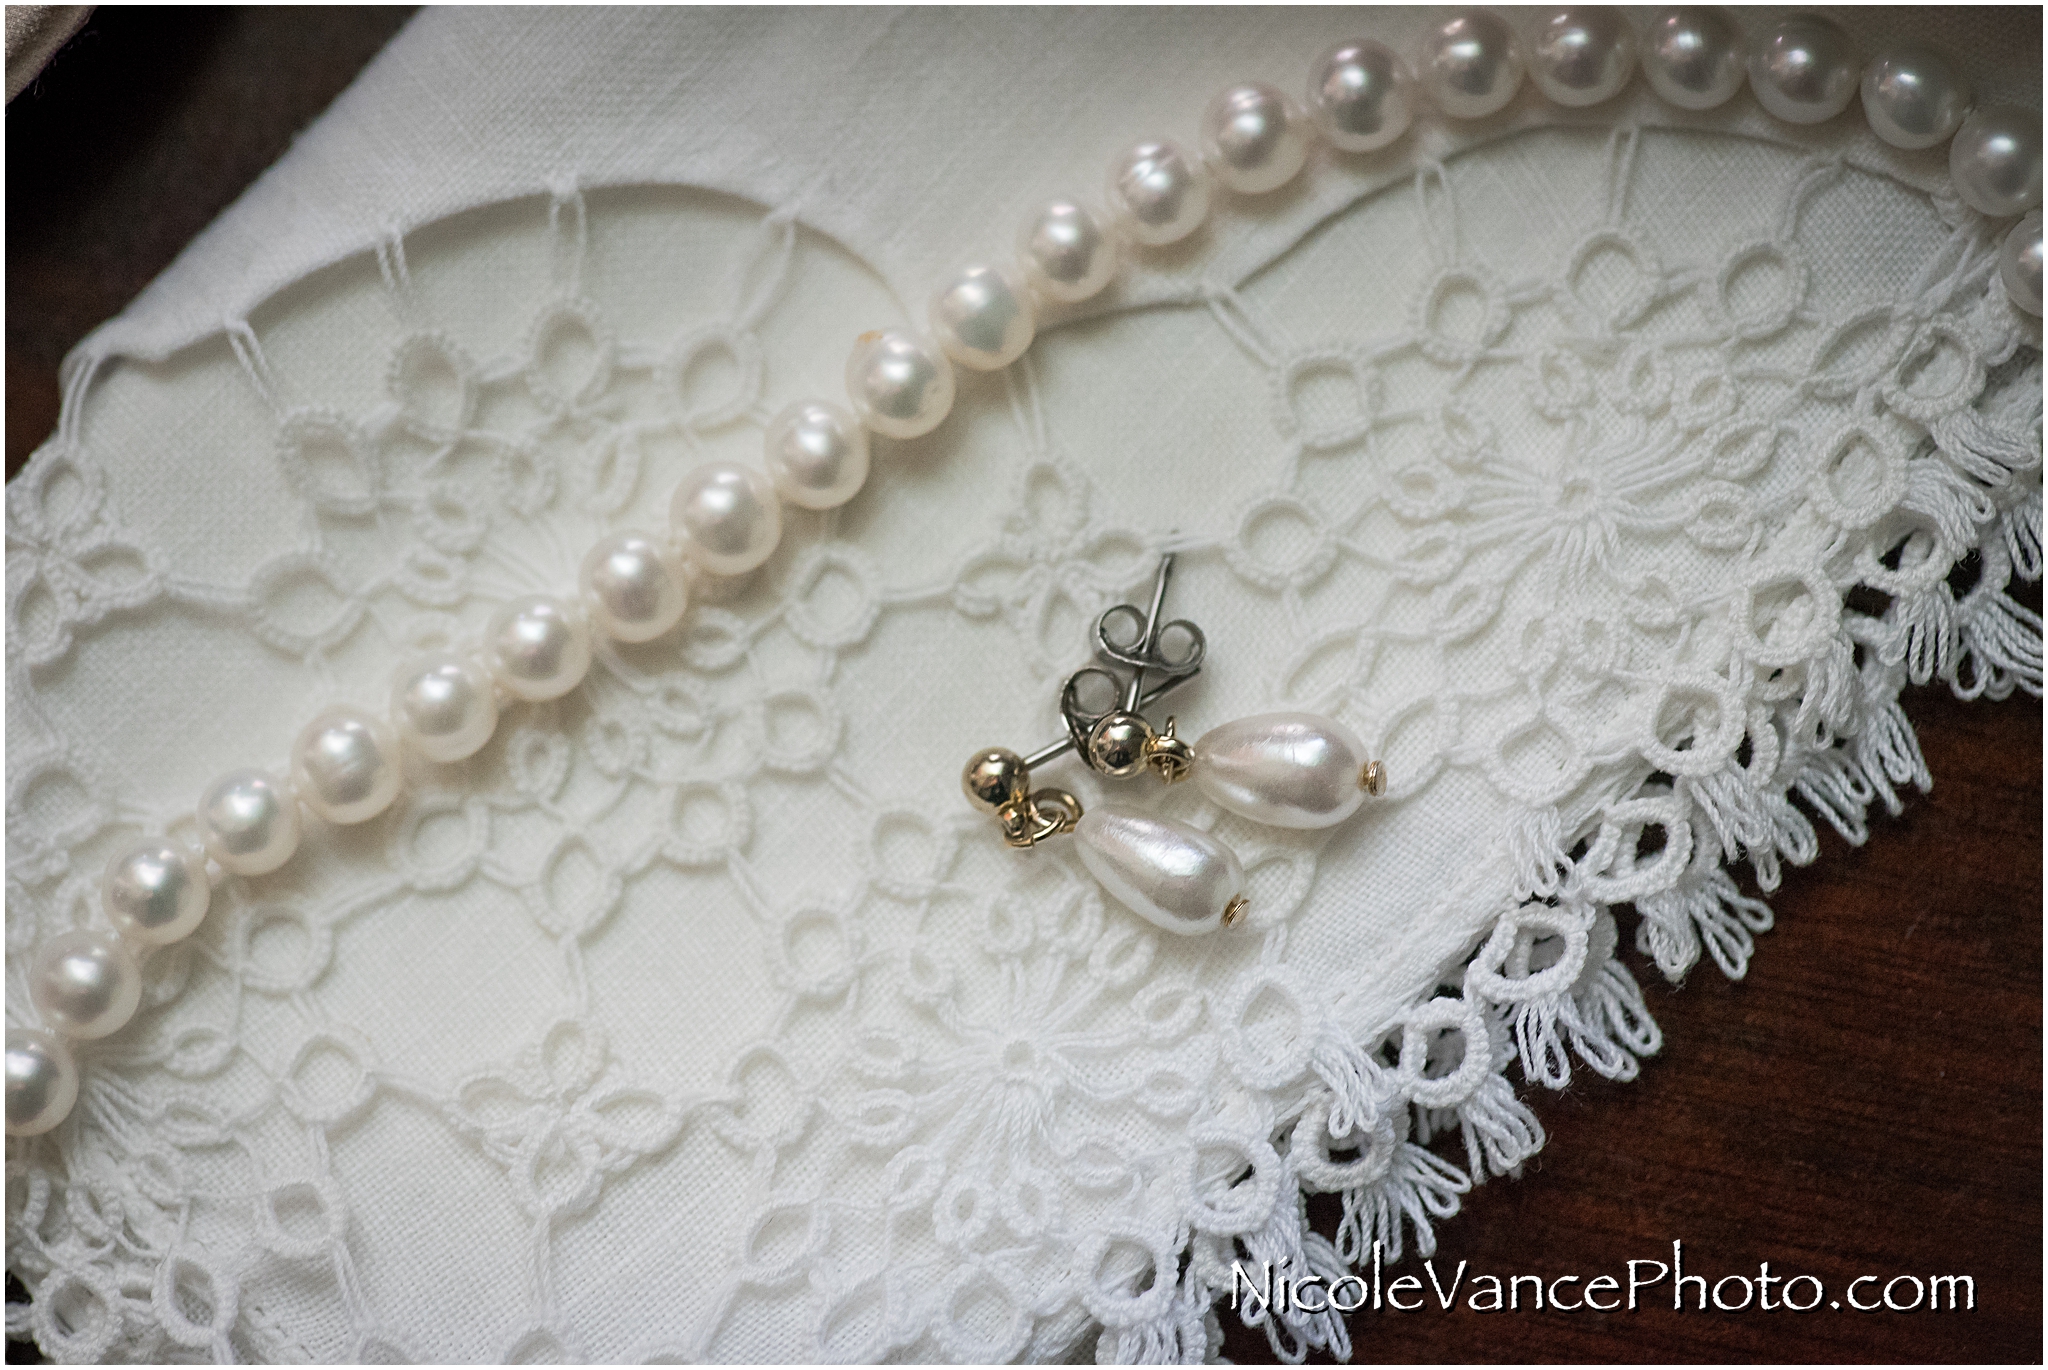 The wedding jewelry consisted of pearls and a beautiful handkerchief.